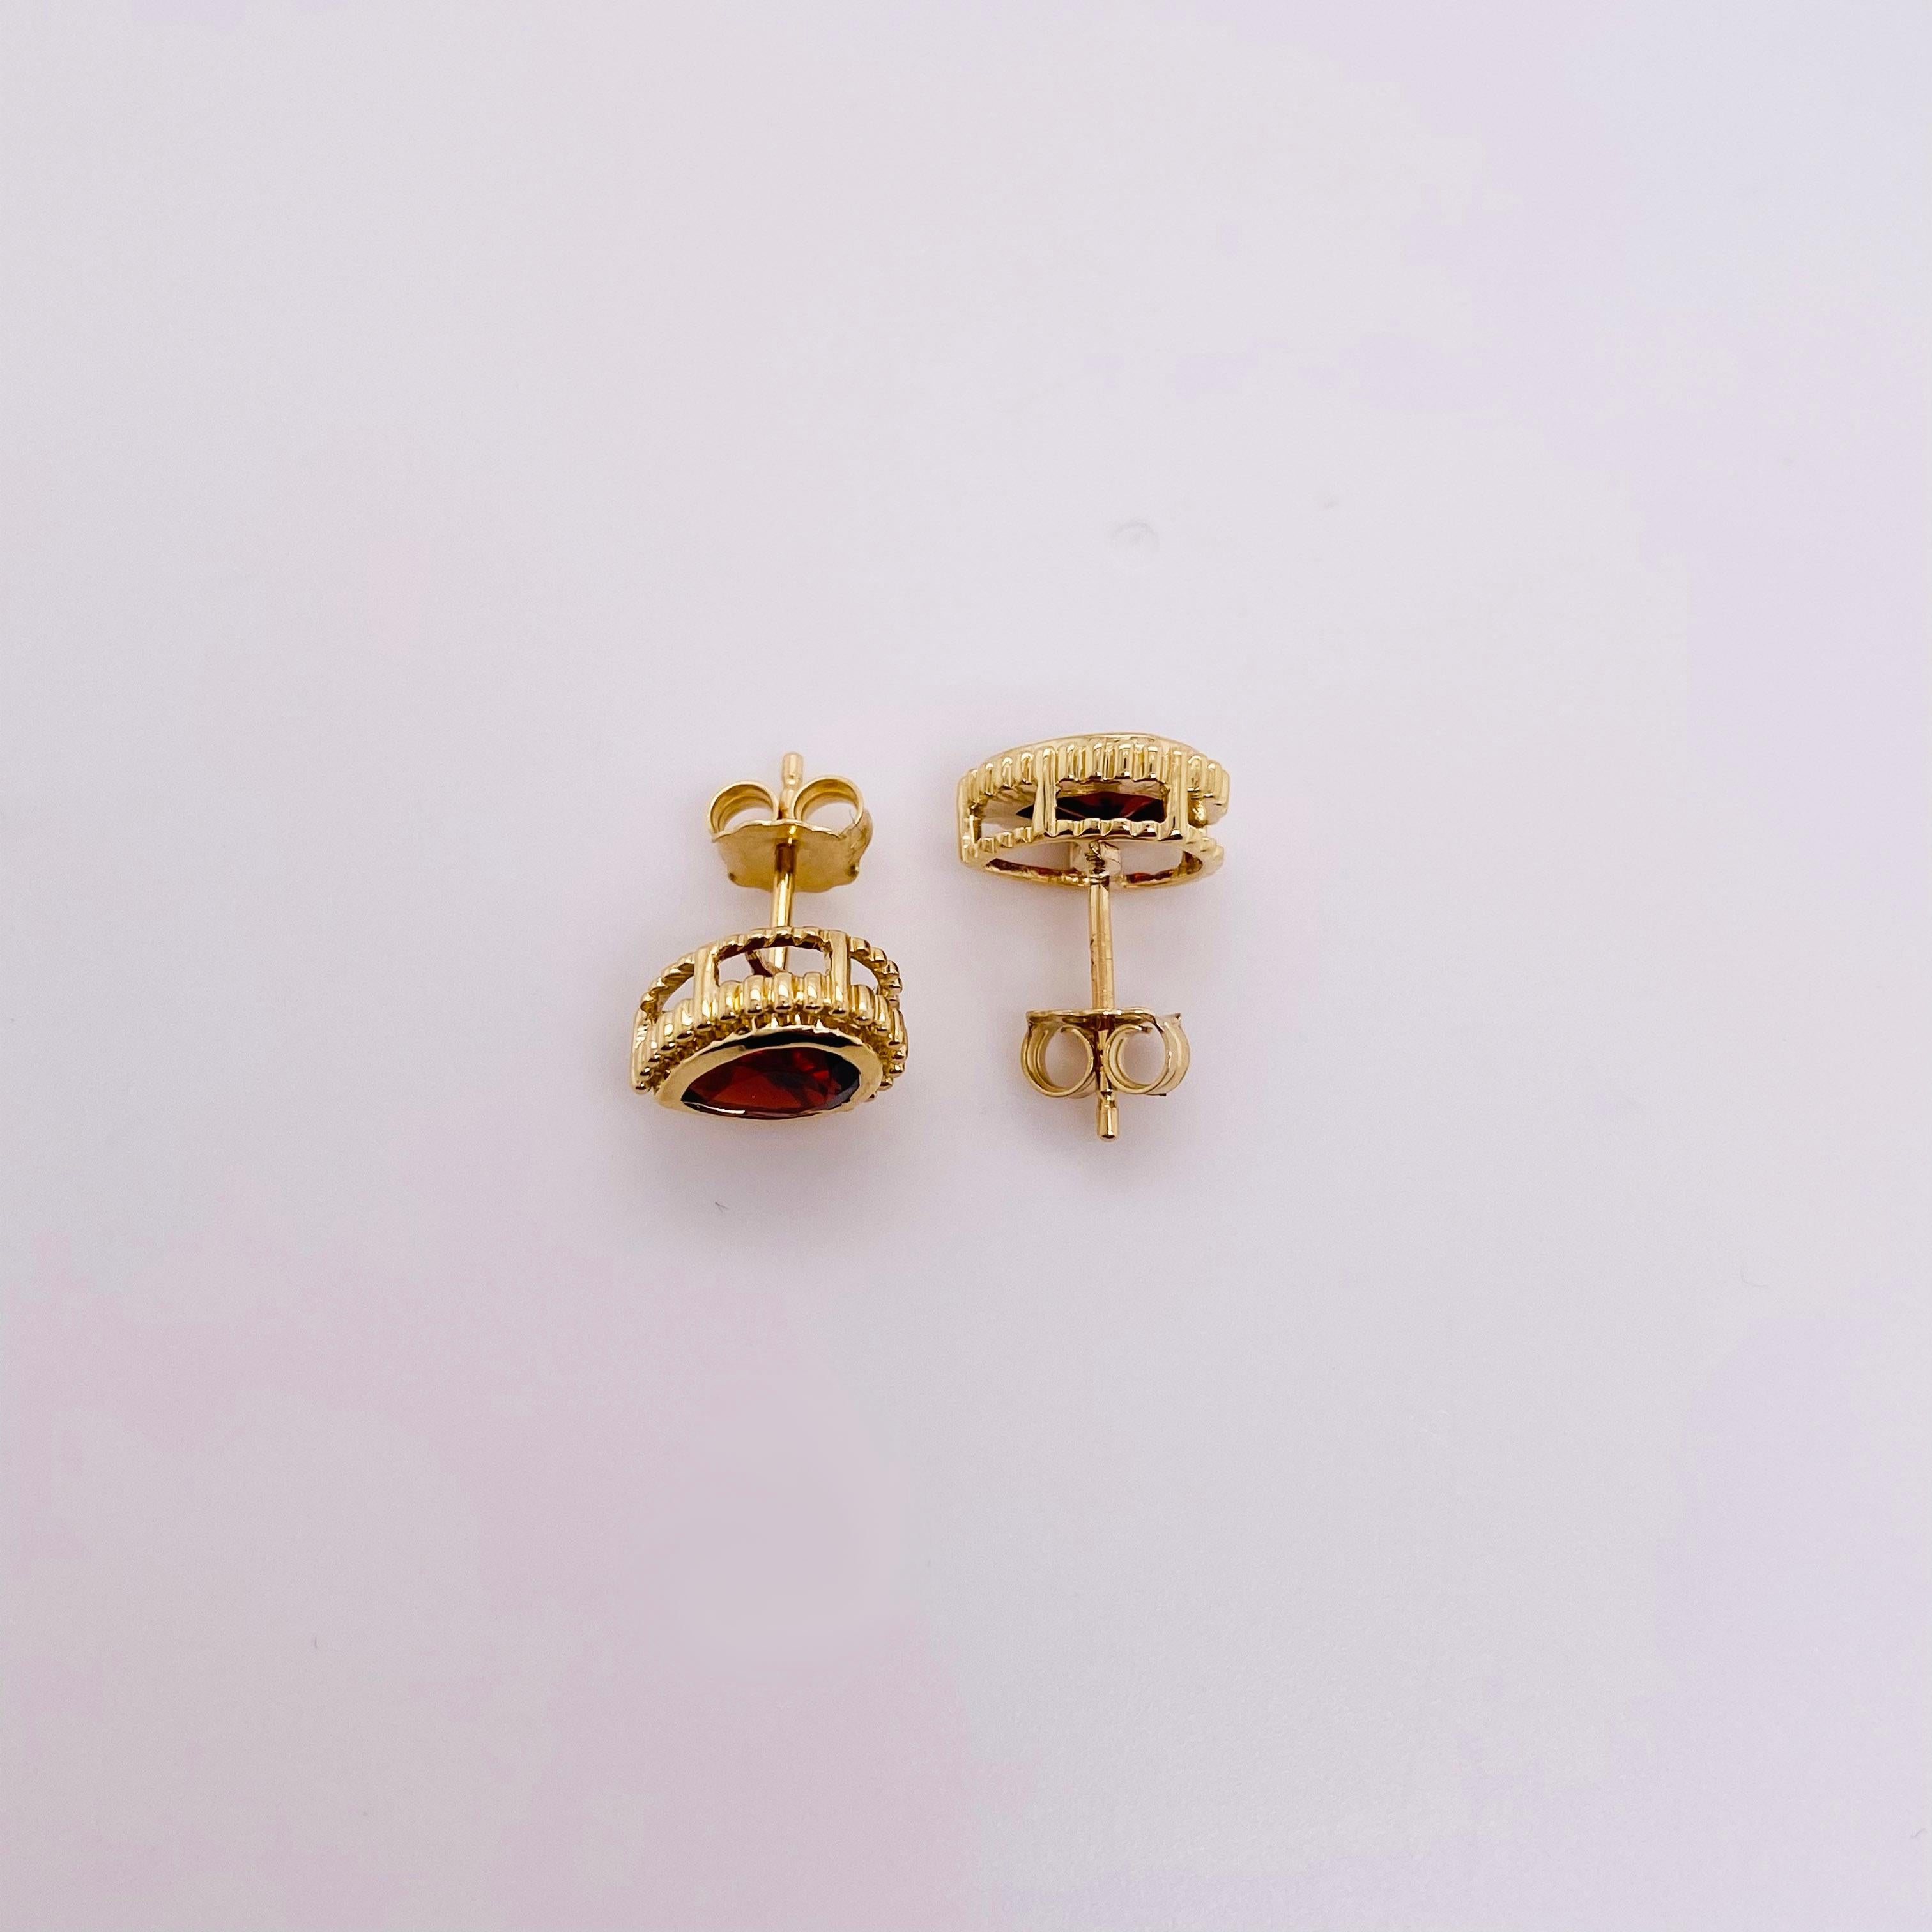 The details for these gorgeous earrings are listed below:
Metal Quality: 14 K Yellow Gold 
Earring Type: Stud 
Gemstone: Garent 
Gemstone Weight: 2.84 st
Gemstone Color: Red 
Measurements: 10.6mm  X 8.6 mm
Post Type: Stud 
Total Carat Weight: 3.1 g 